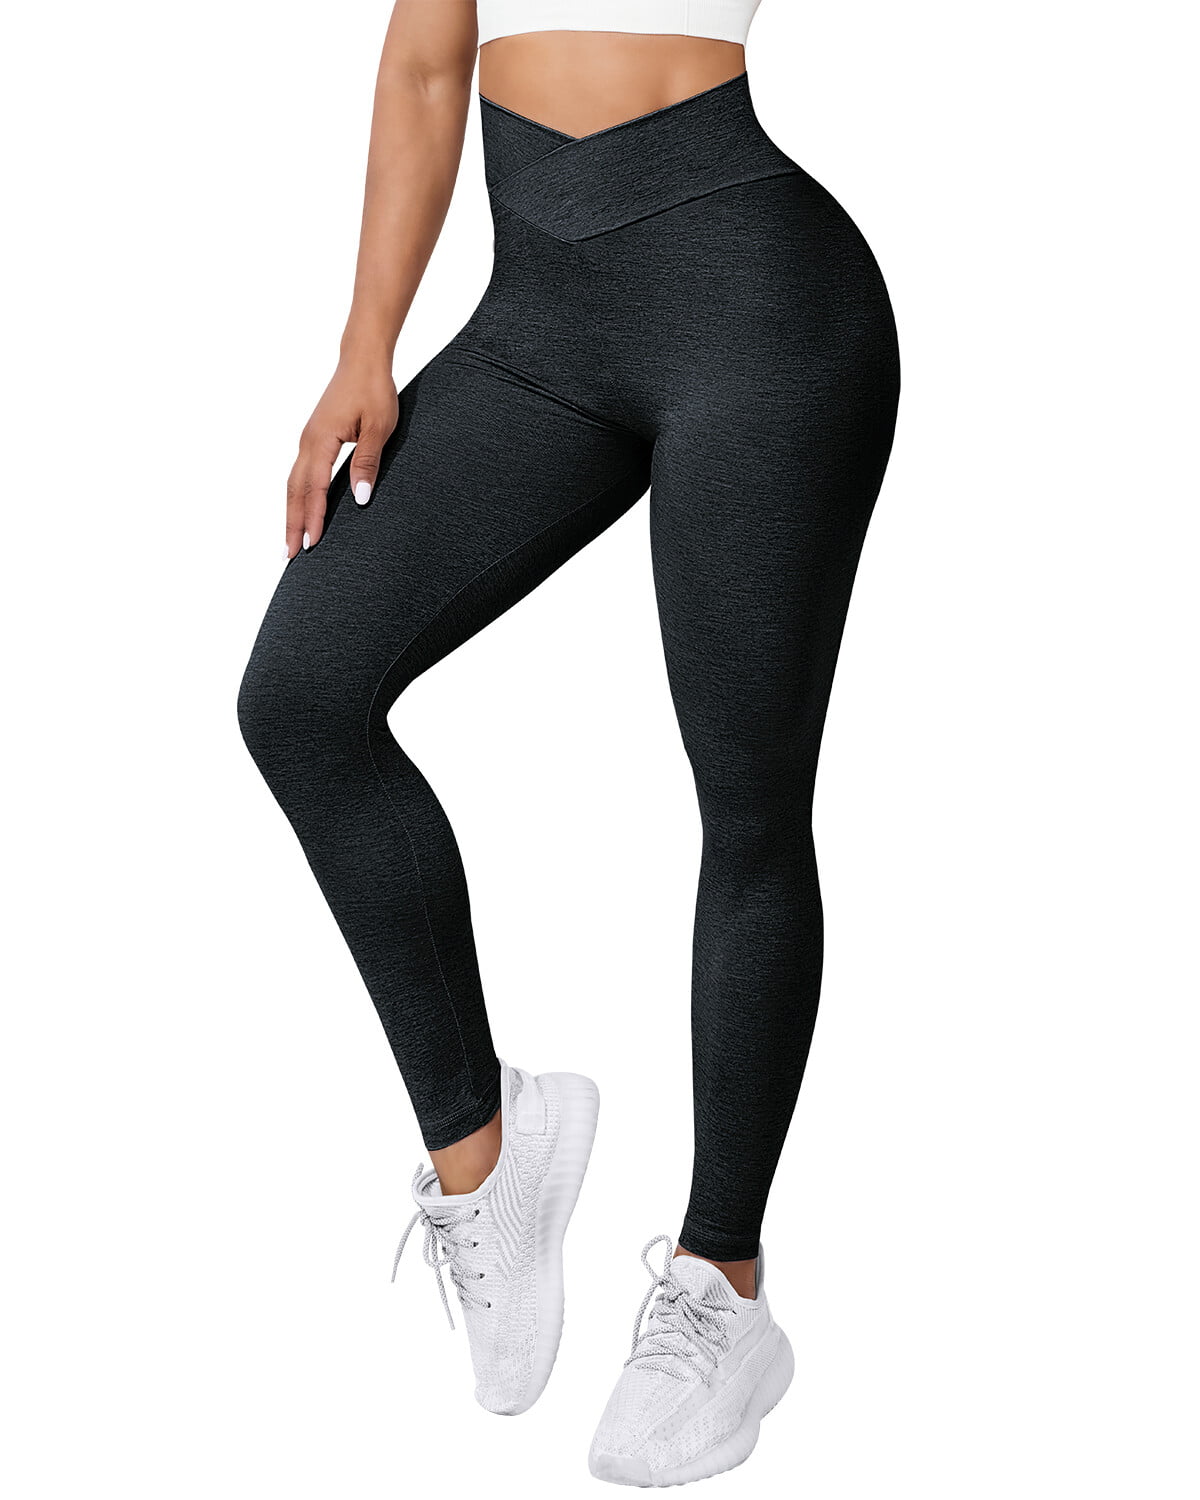 A AGROSTE Seamless Leggings for Women Booty High Waisted Workout Yoga Pants  Amplify Ruched Tights DarkGrey-L 